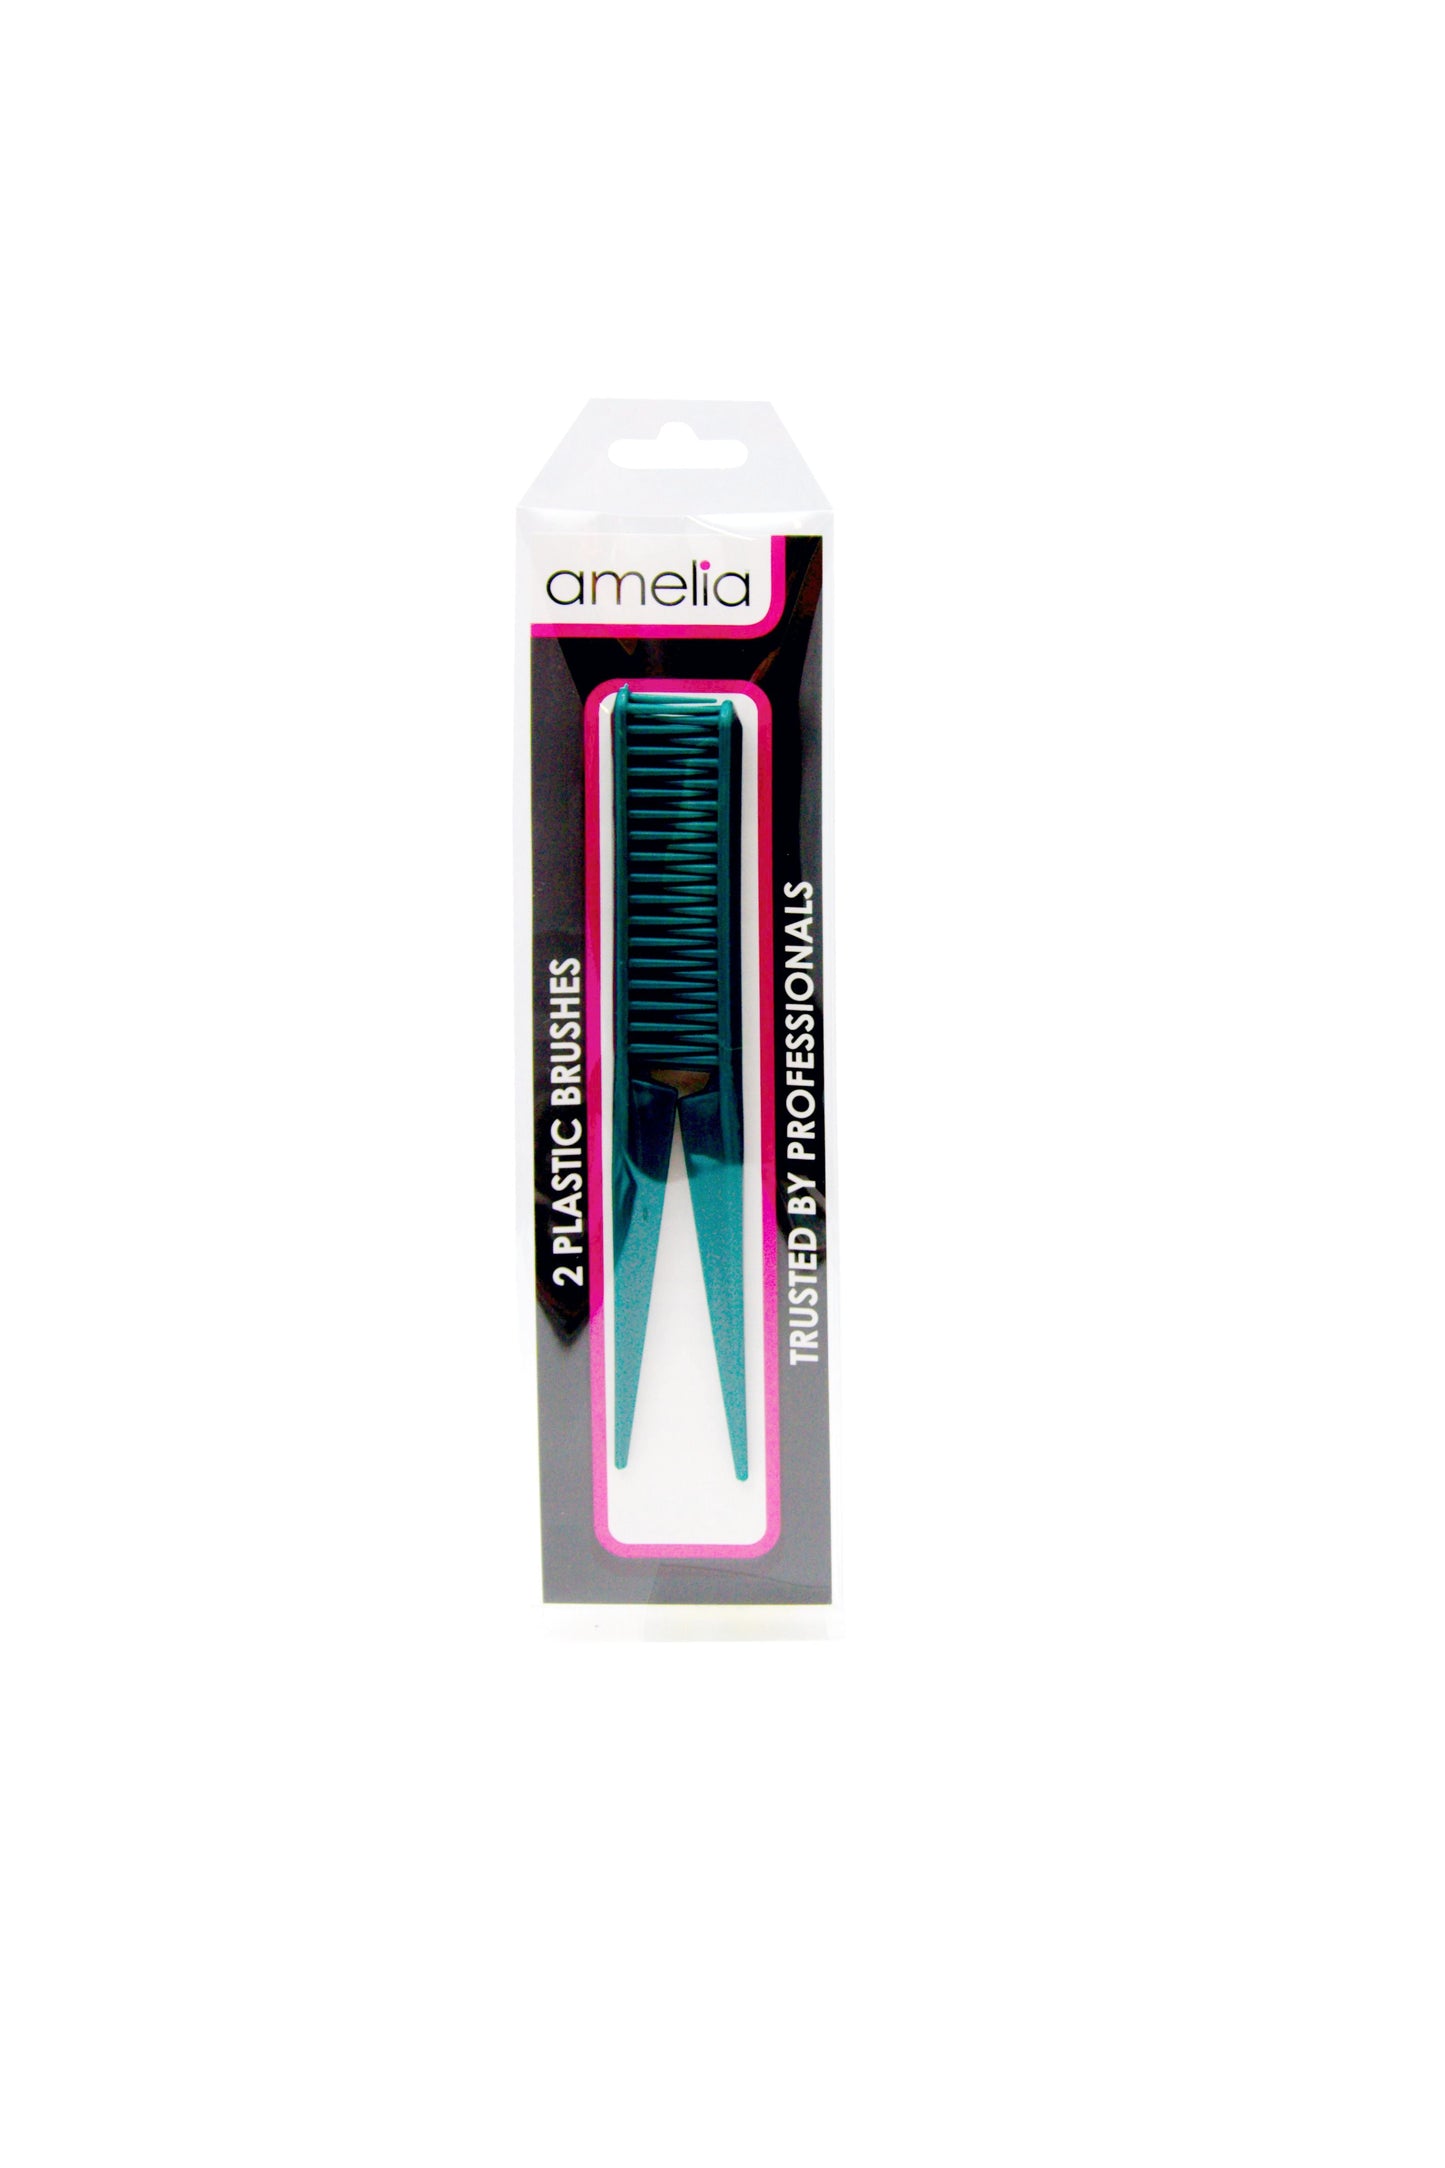 Amelia Beauty, 7in, 3 Row Styling Comb For Detangling, Tease, Defining And Separating Curls - Green - 12 Retail Packs